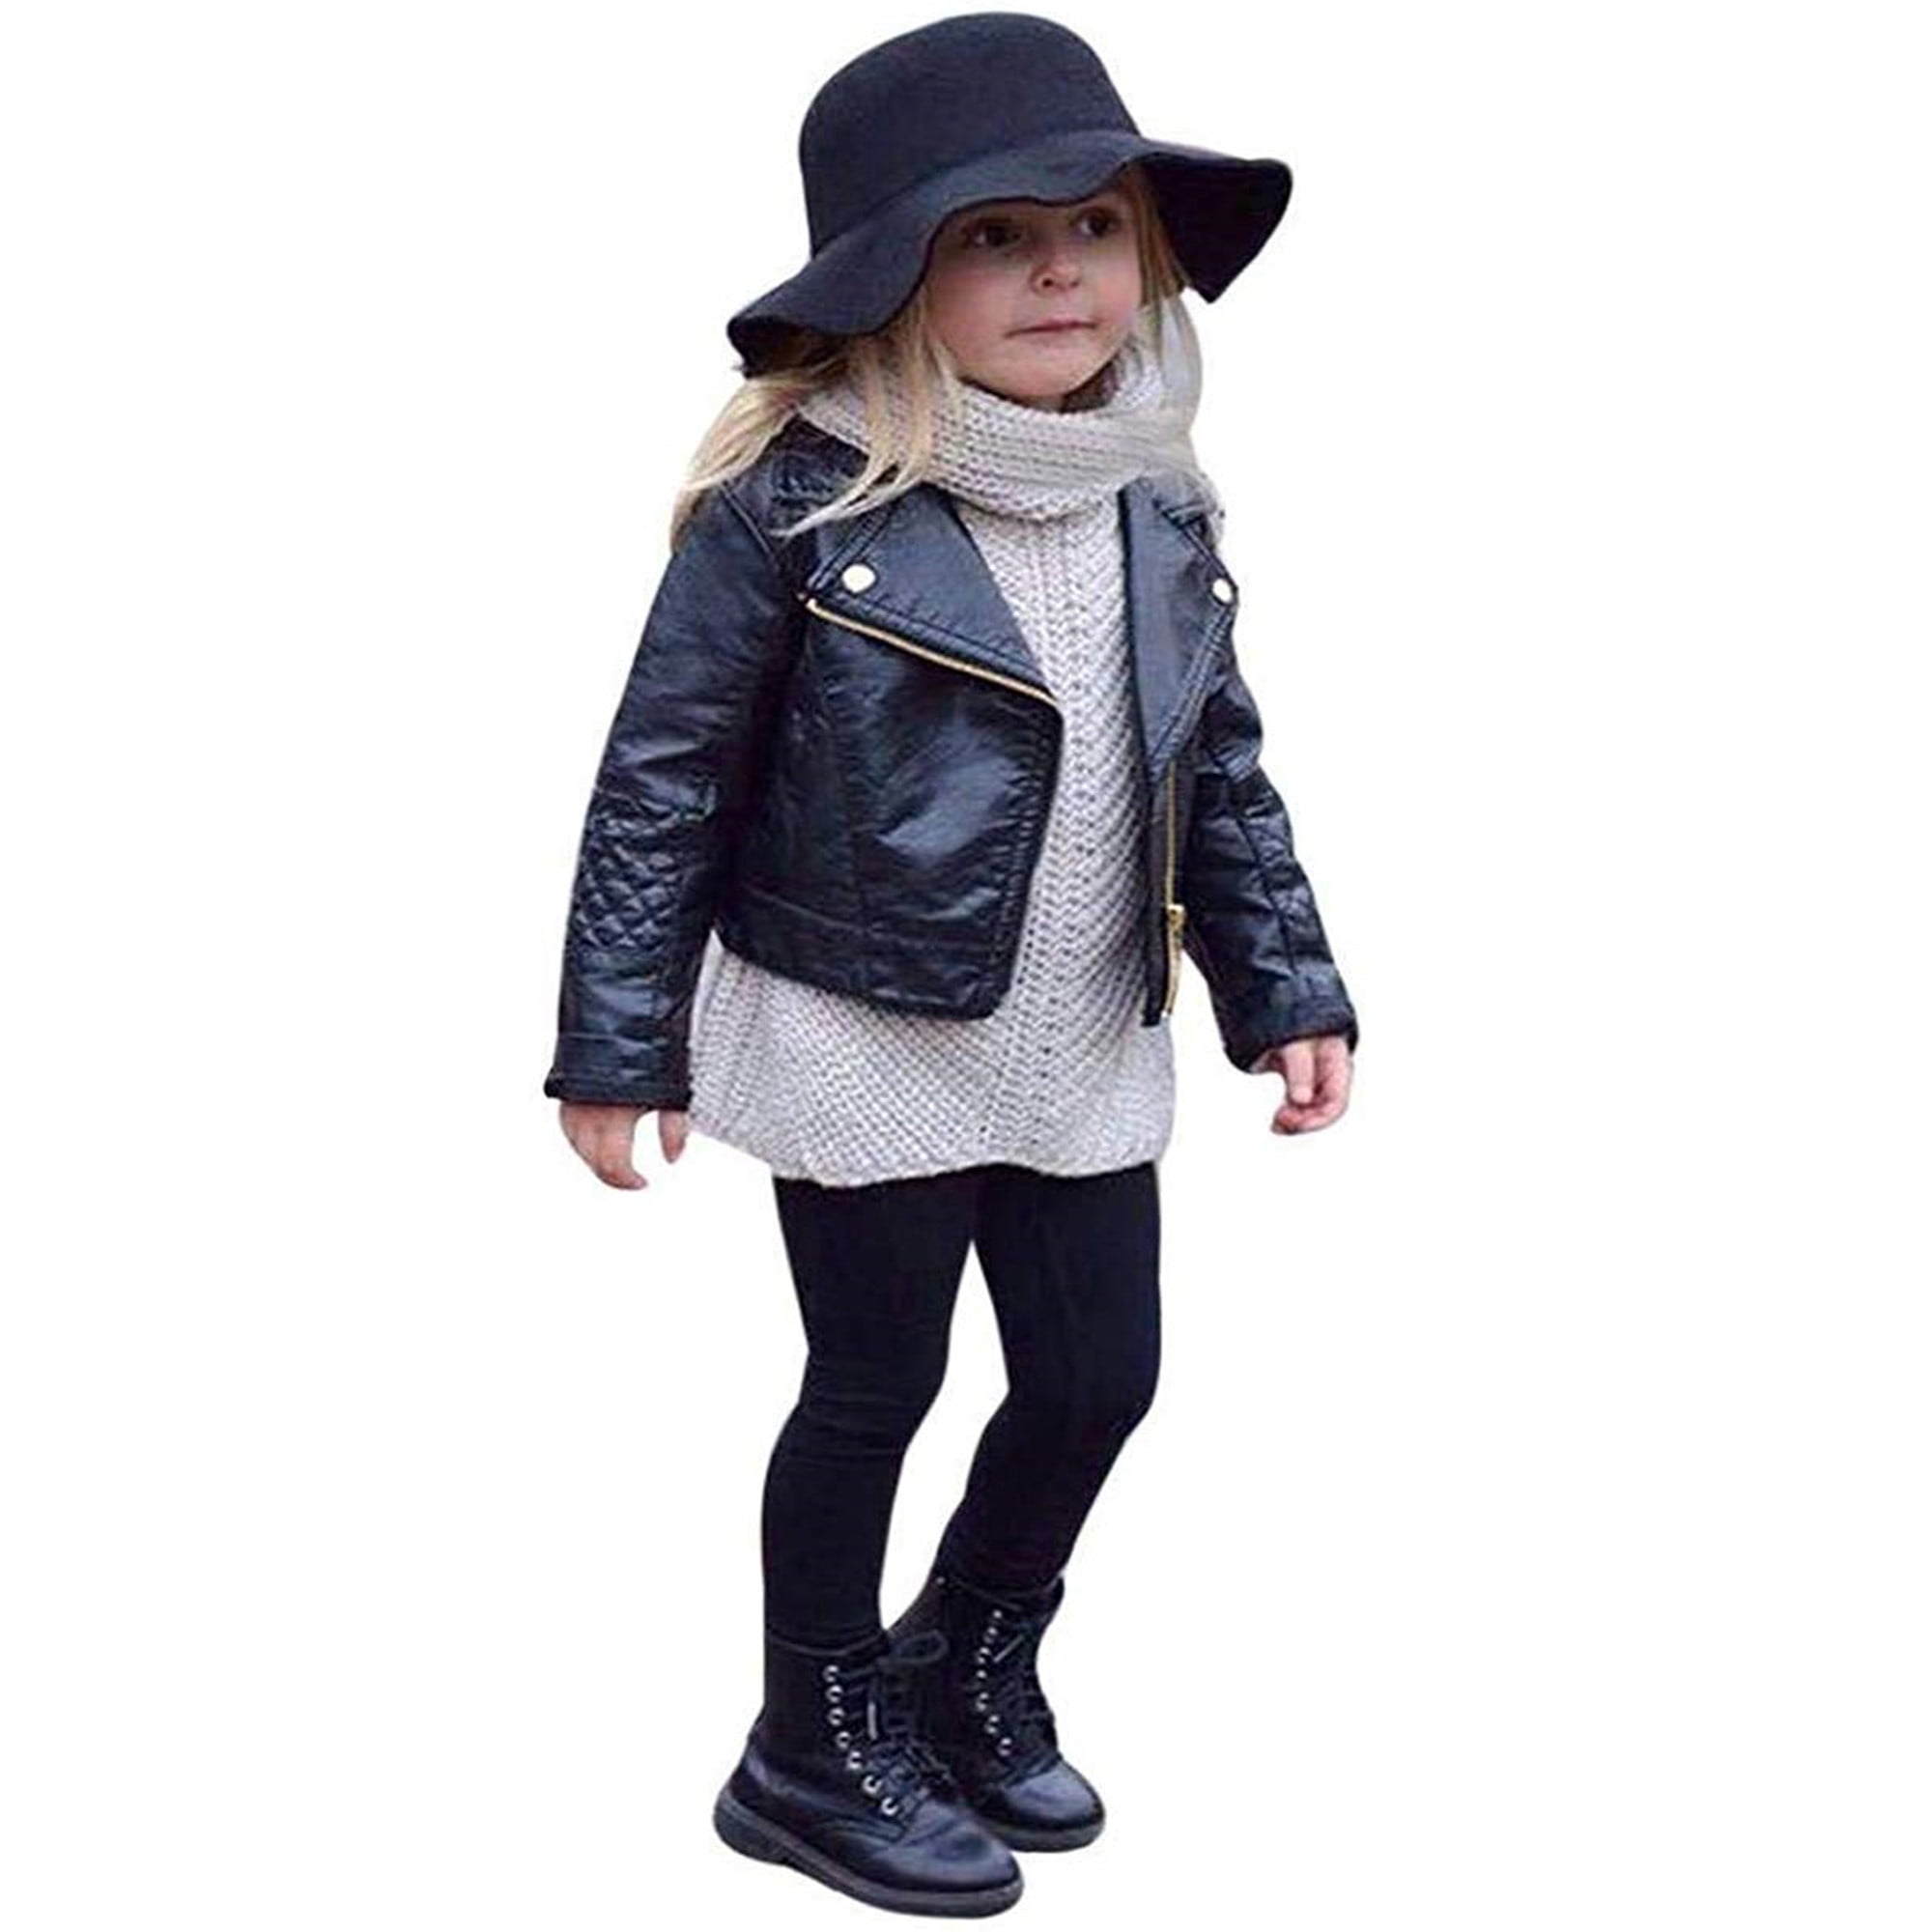 Toddler Baby Girls Boys Long Sleeve Solid Outwear Leather Coat Jacket Clothes 1-5 Years